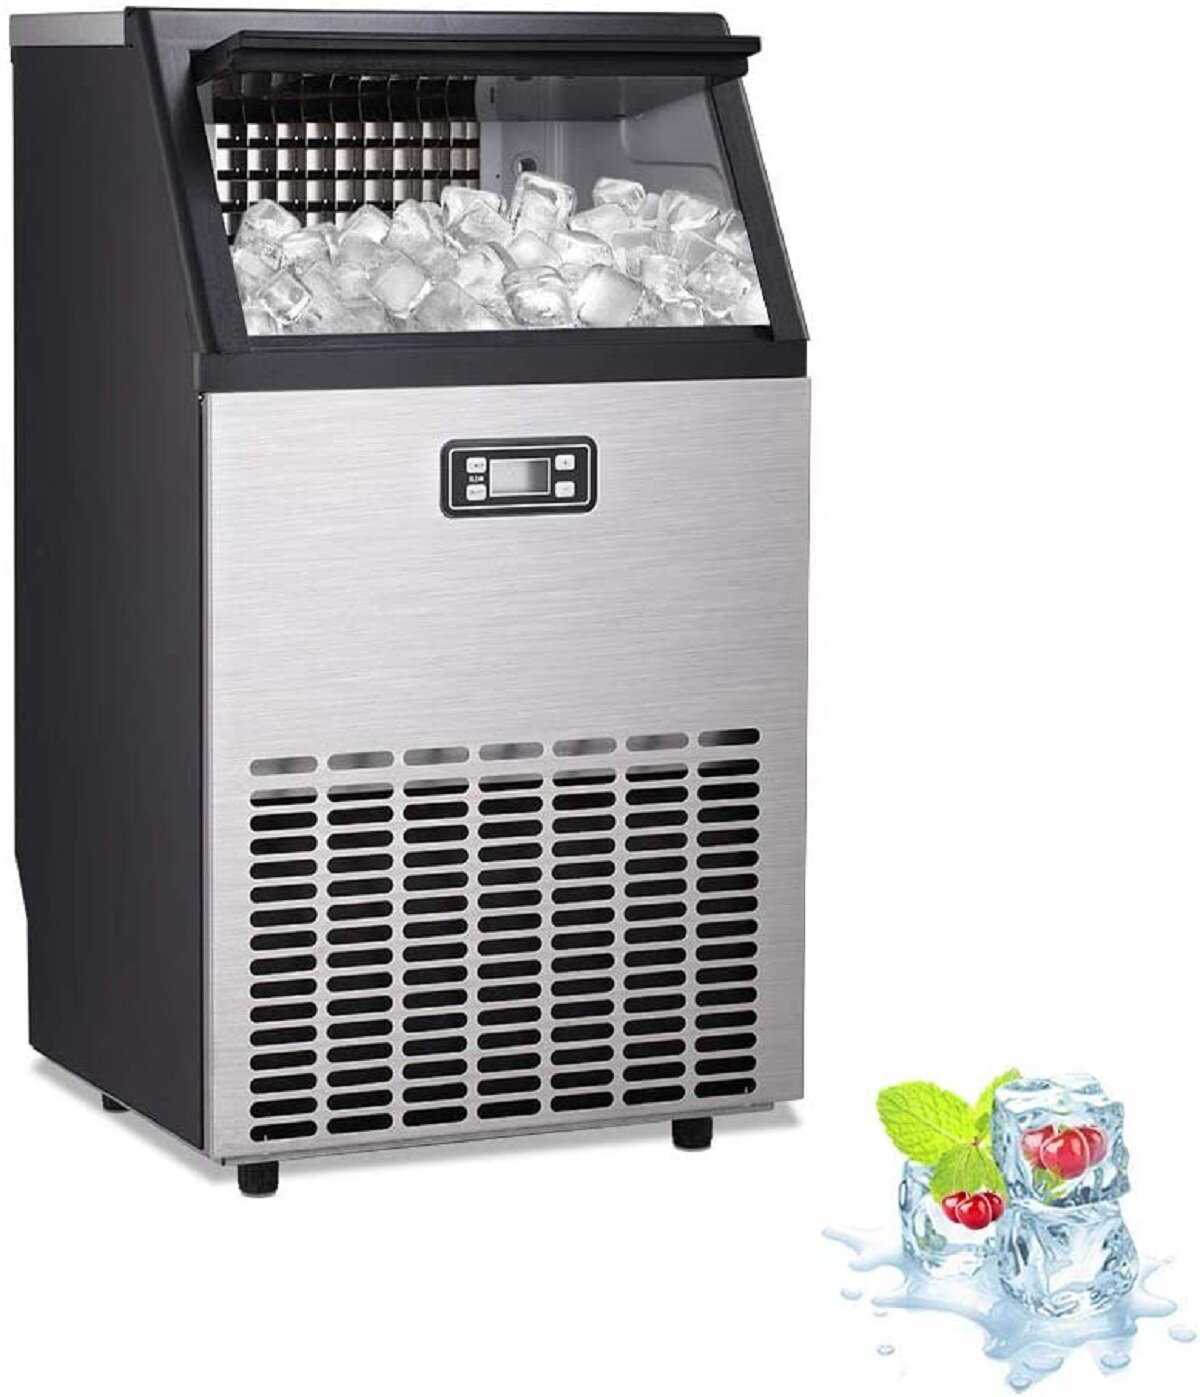 KELIVOL 100 Lb. Daily Production Cube Clear Ice Freestanding Ice